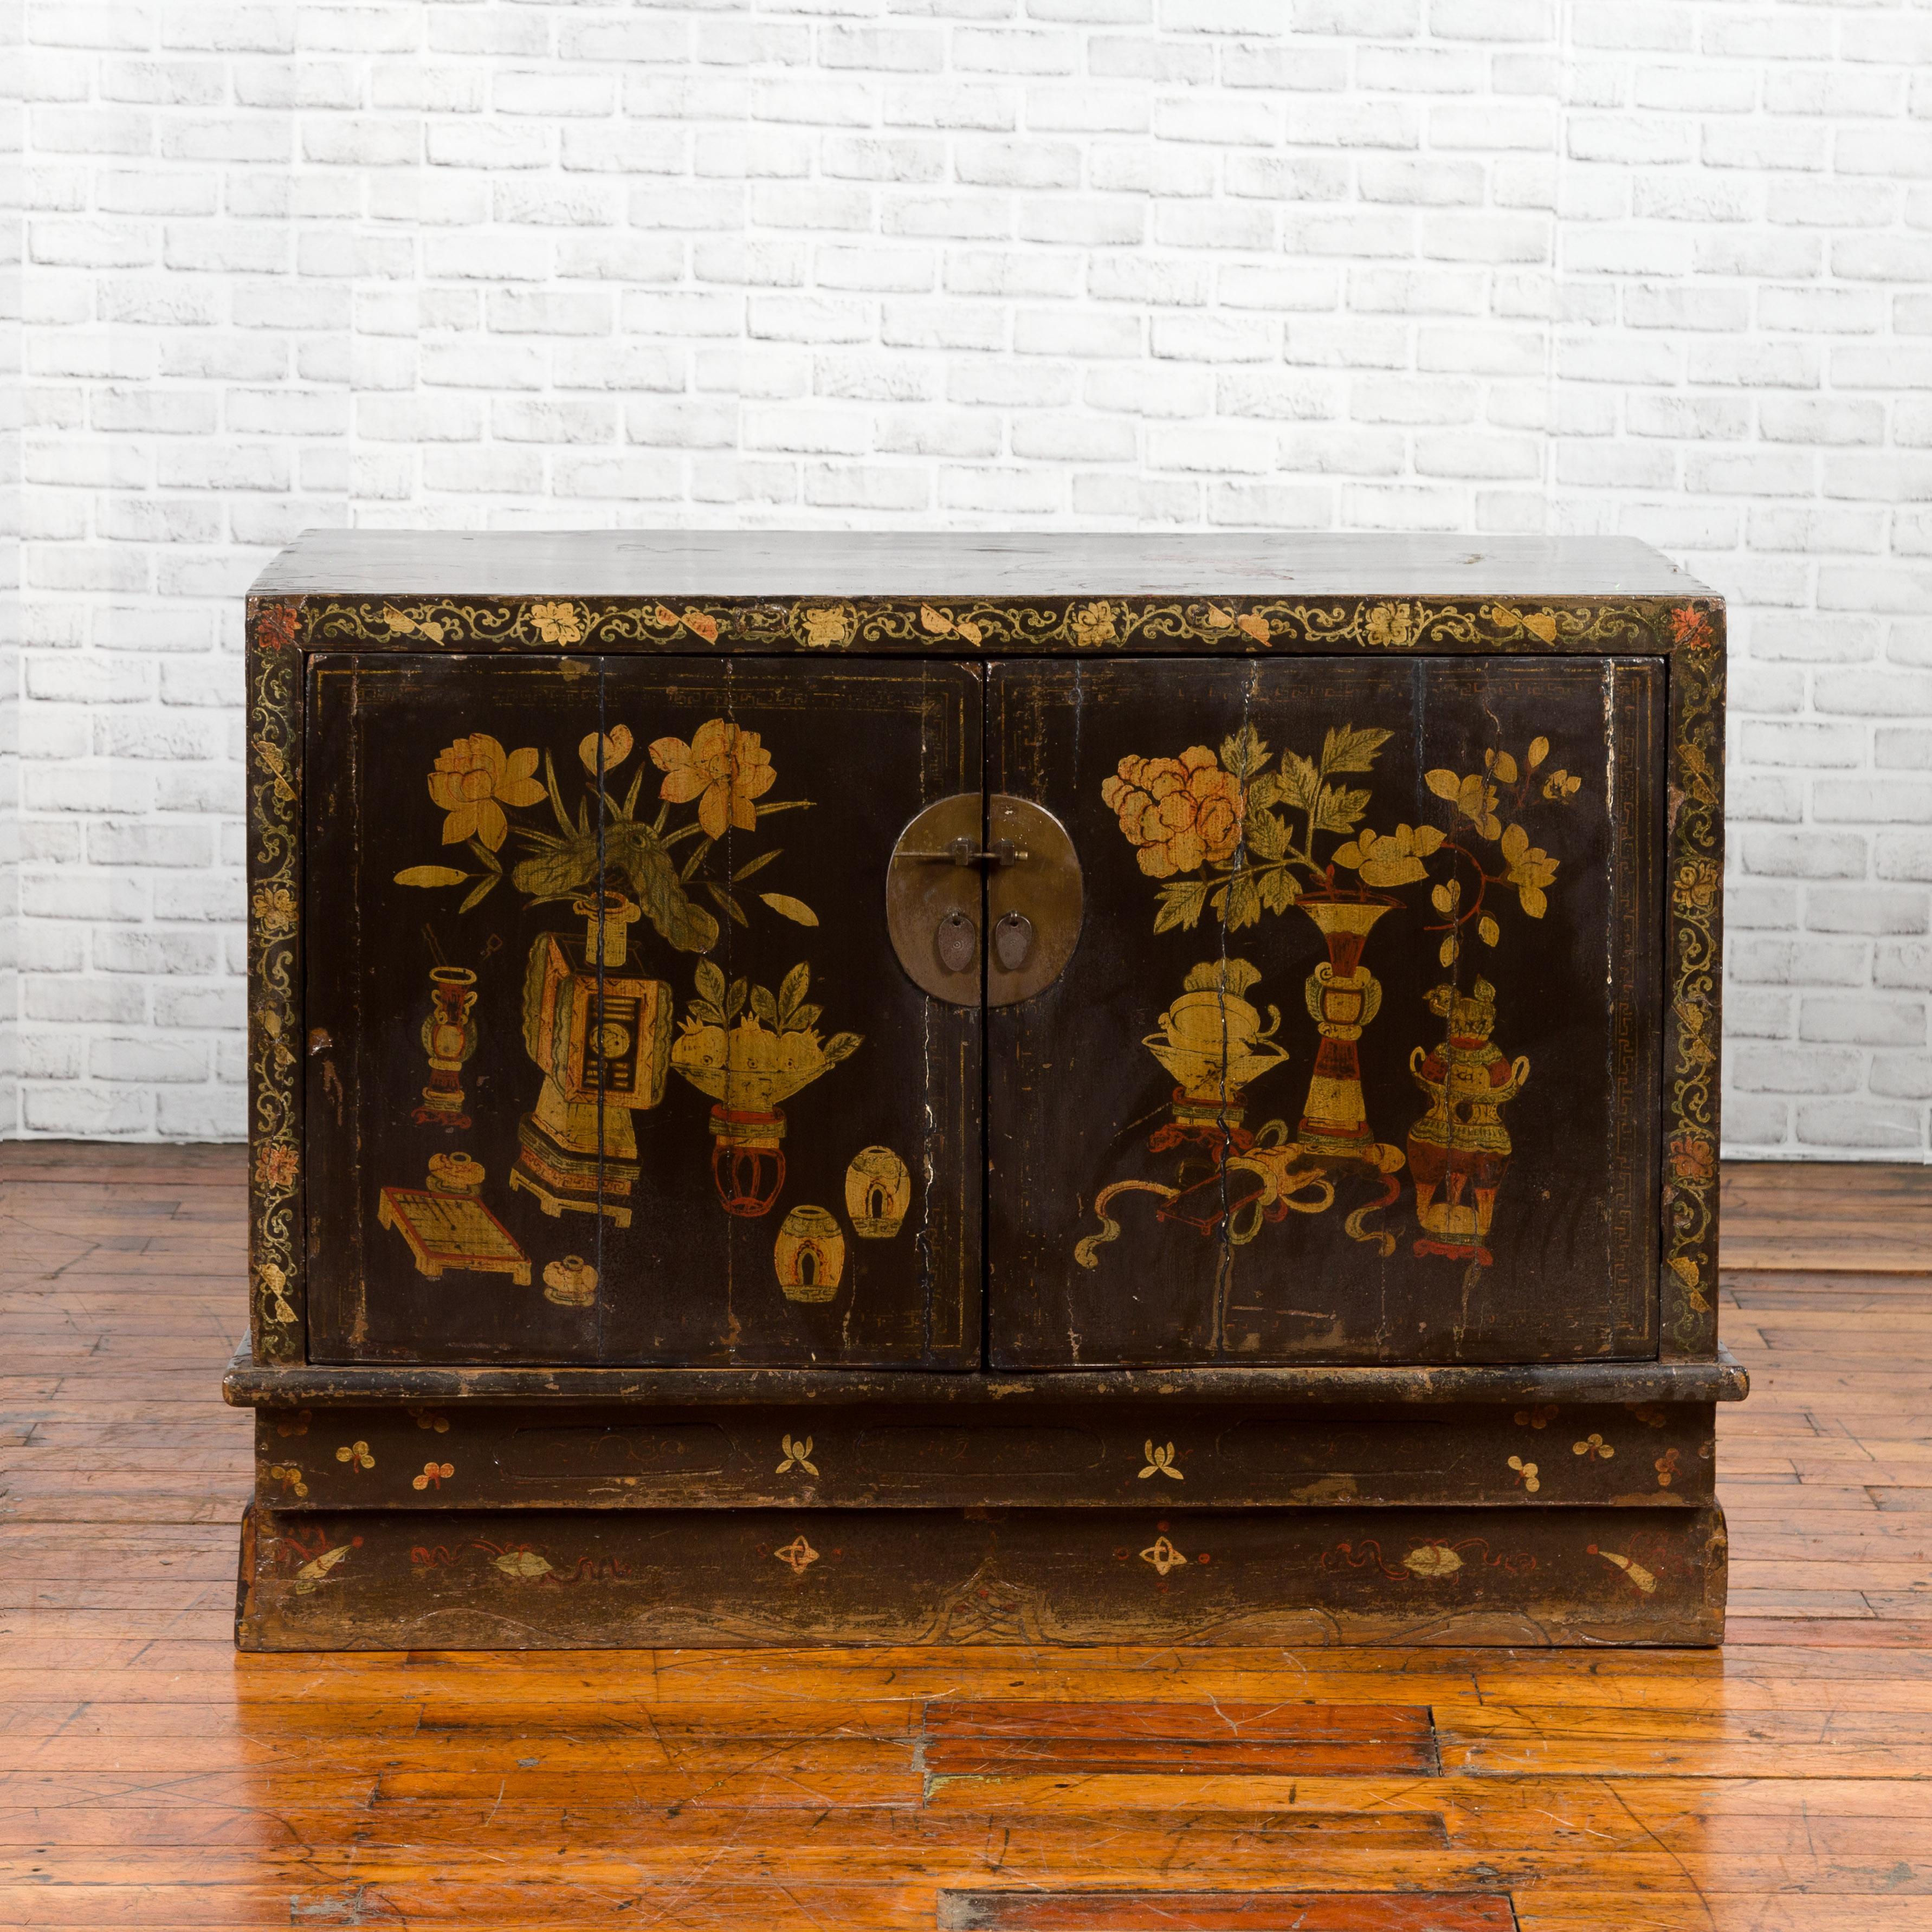 A Chinese dark brown lacquered sideboard from the 19th century, with hand painted motifs. Created in China during the 19th century, this brown lacquered sideboard features a distressed rectangular top sitting above two doors, adorned with hand